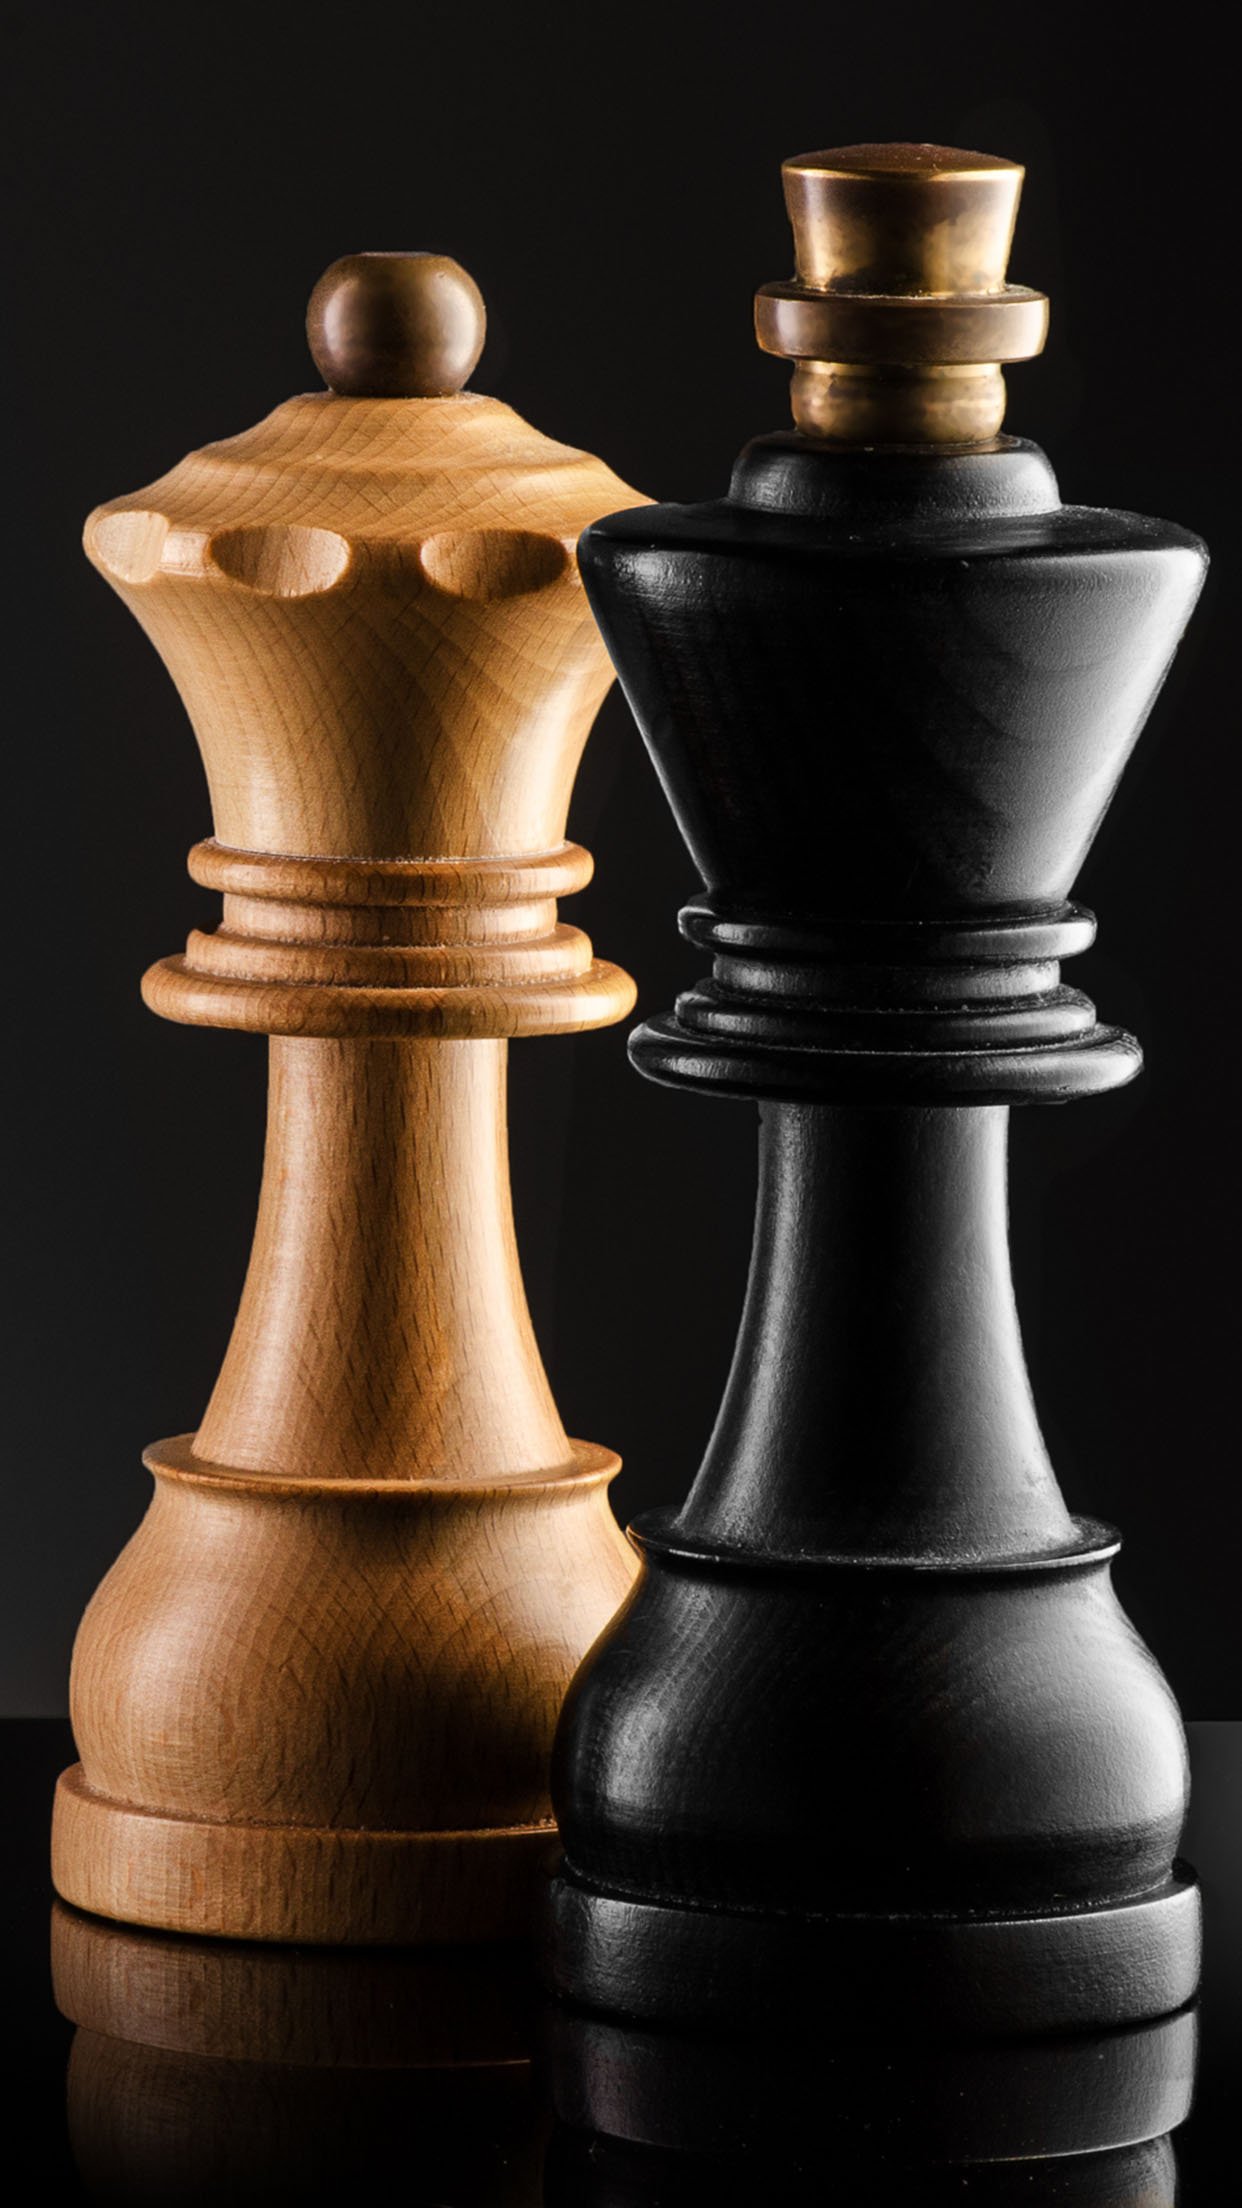 Chess 1 Wallpaper for iPhone Pro Max, X, 6